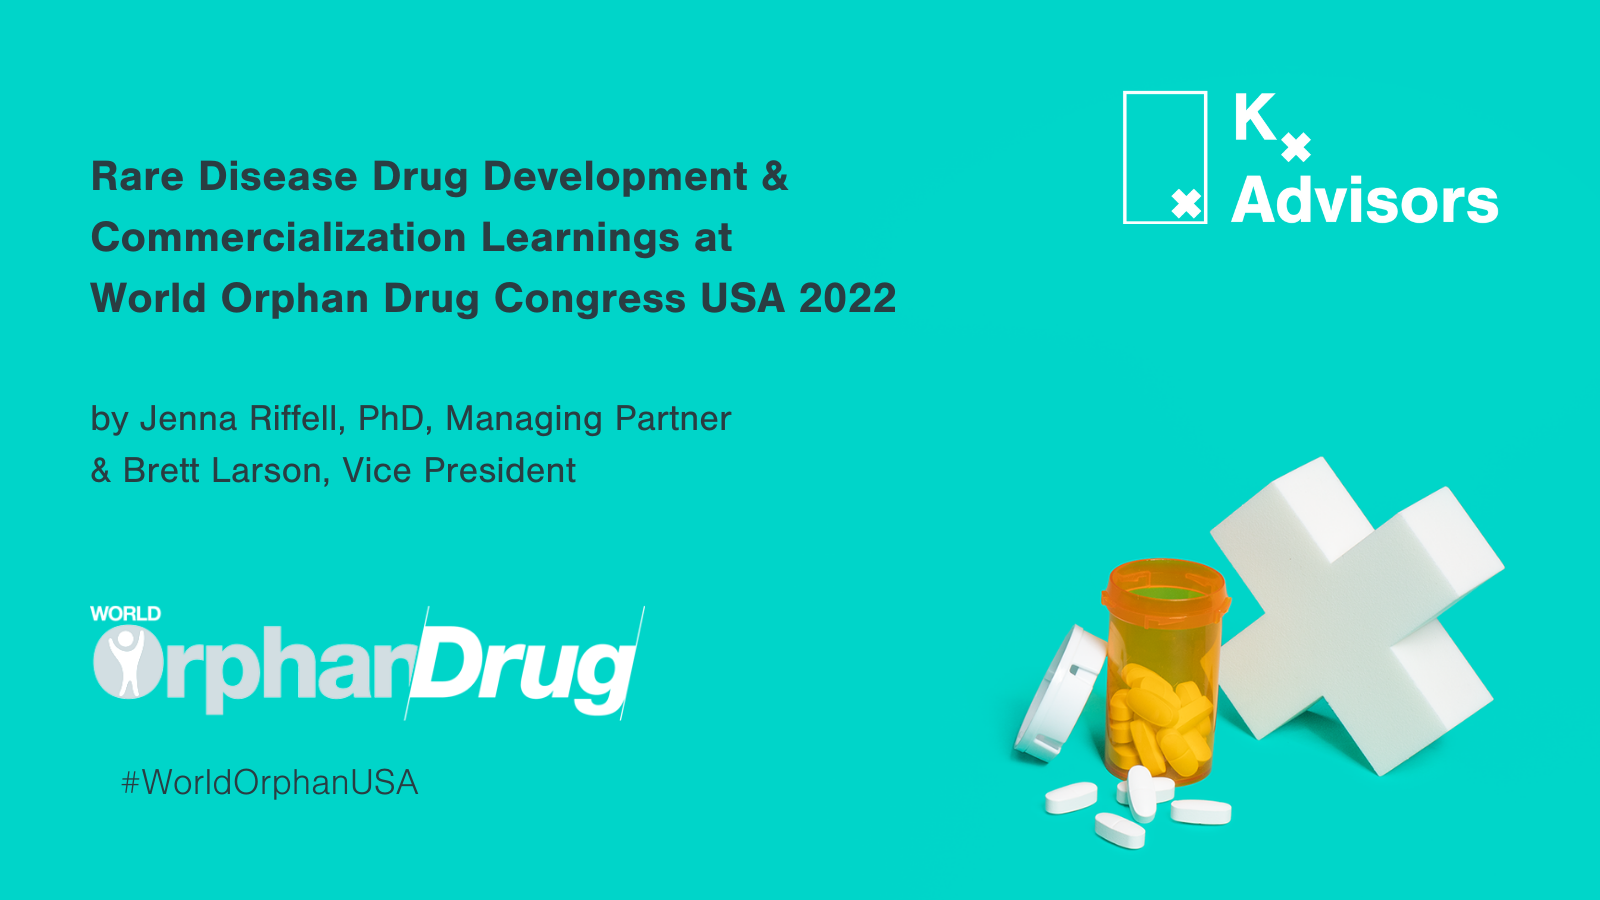 Rare Disease Drug Development & Commercialization Learnings, Opportunities & Debates at World Orphan Drug Congress USA 2022